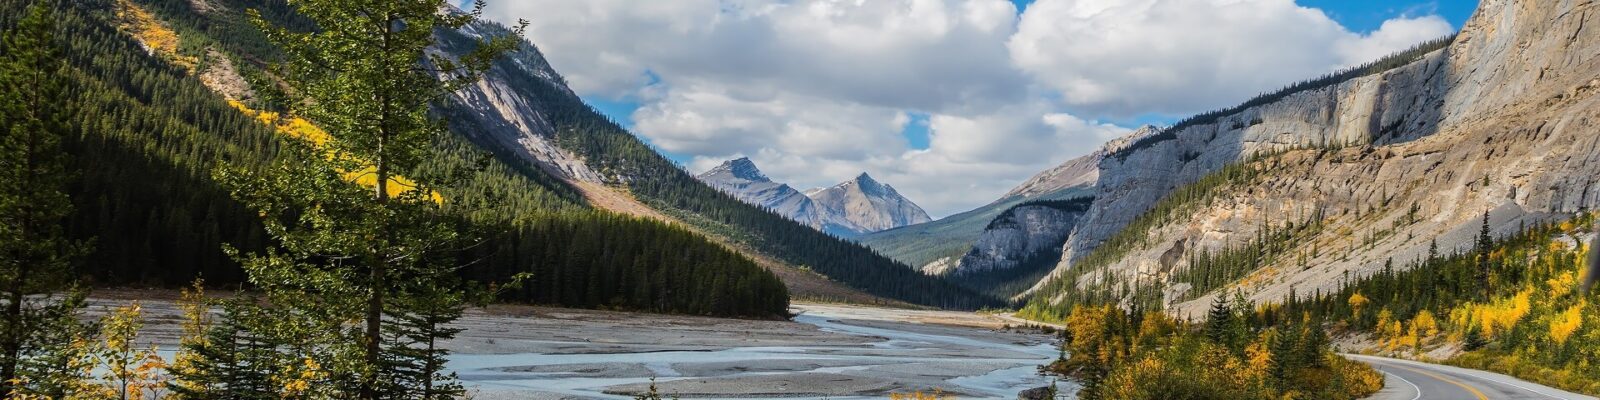 An Awesome Road Trip of Canada’s Rocky Mountains